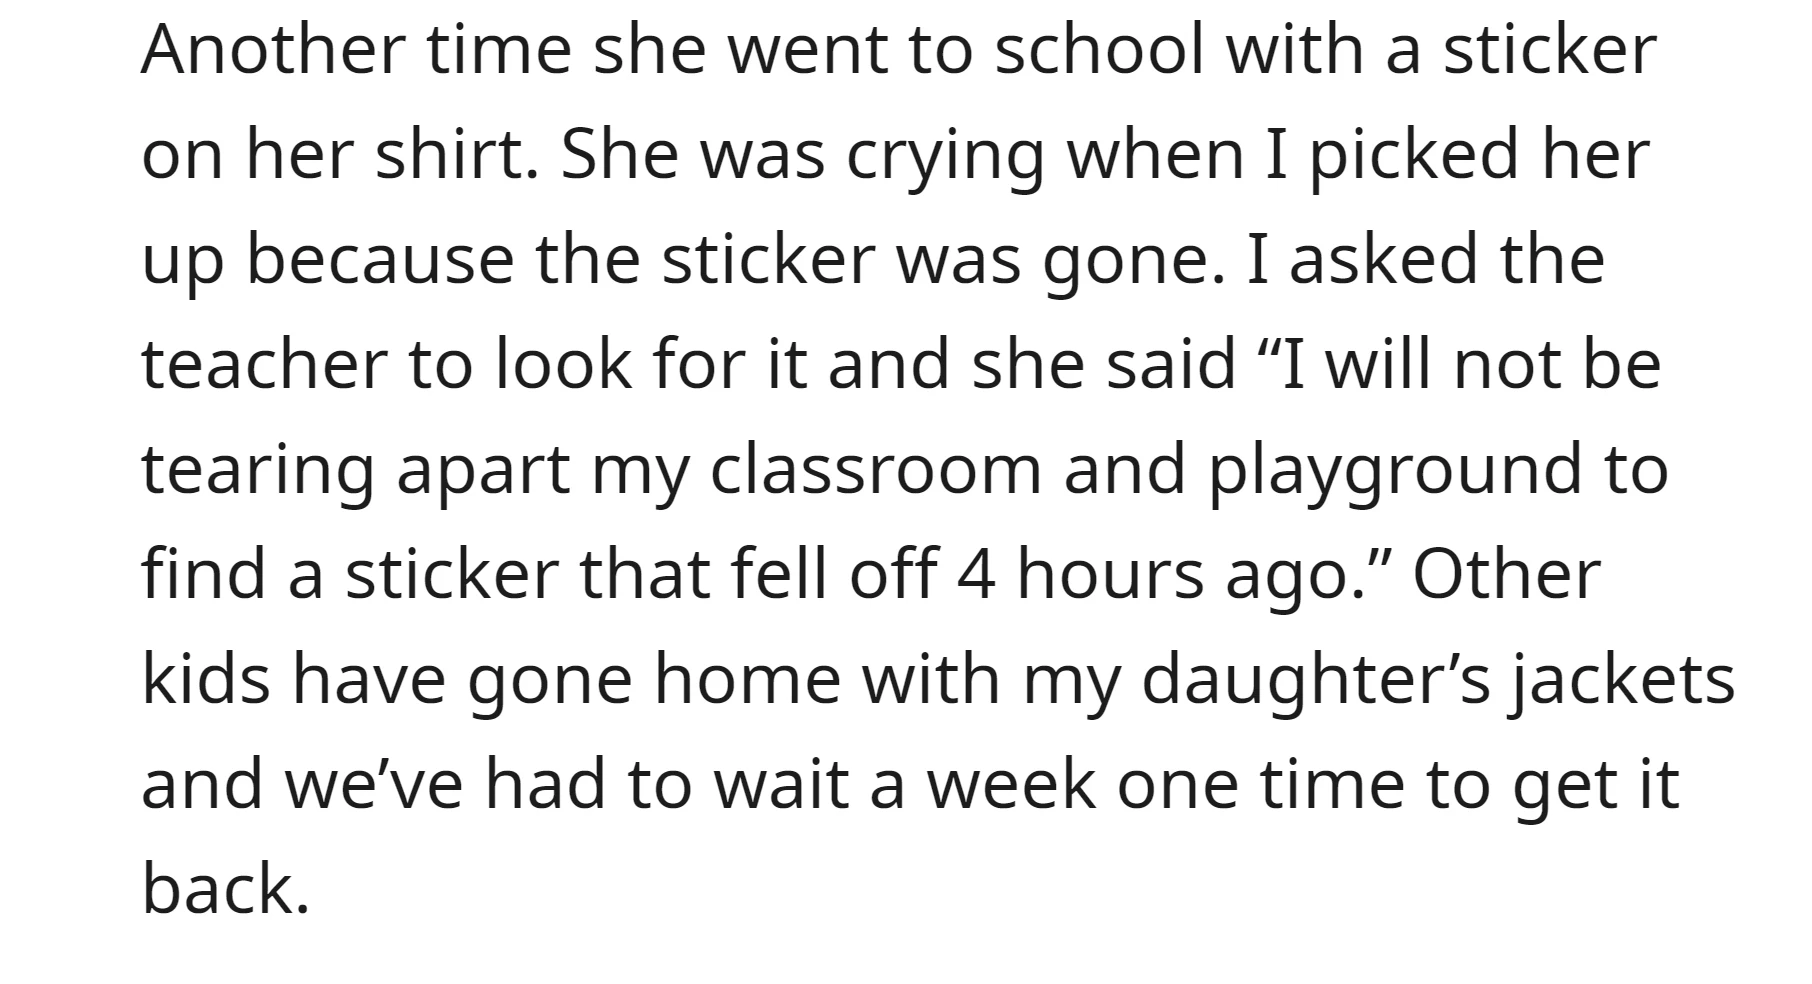 Another time, the teacher refused to help OP's daughter to find a lost sticker